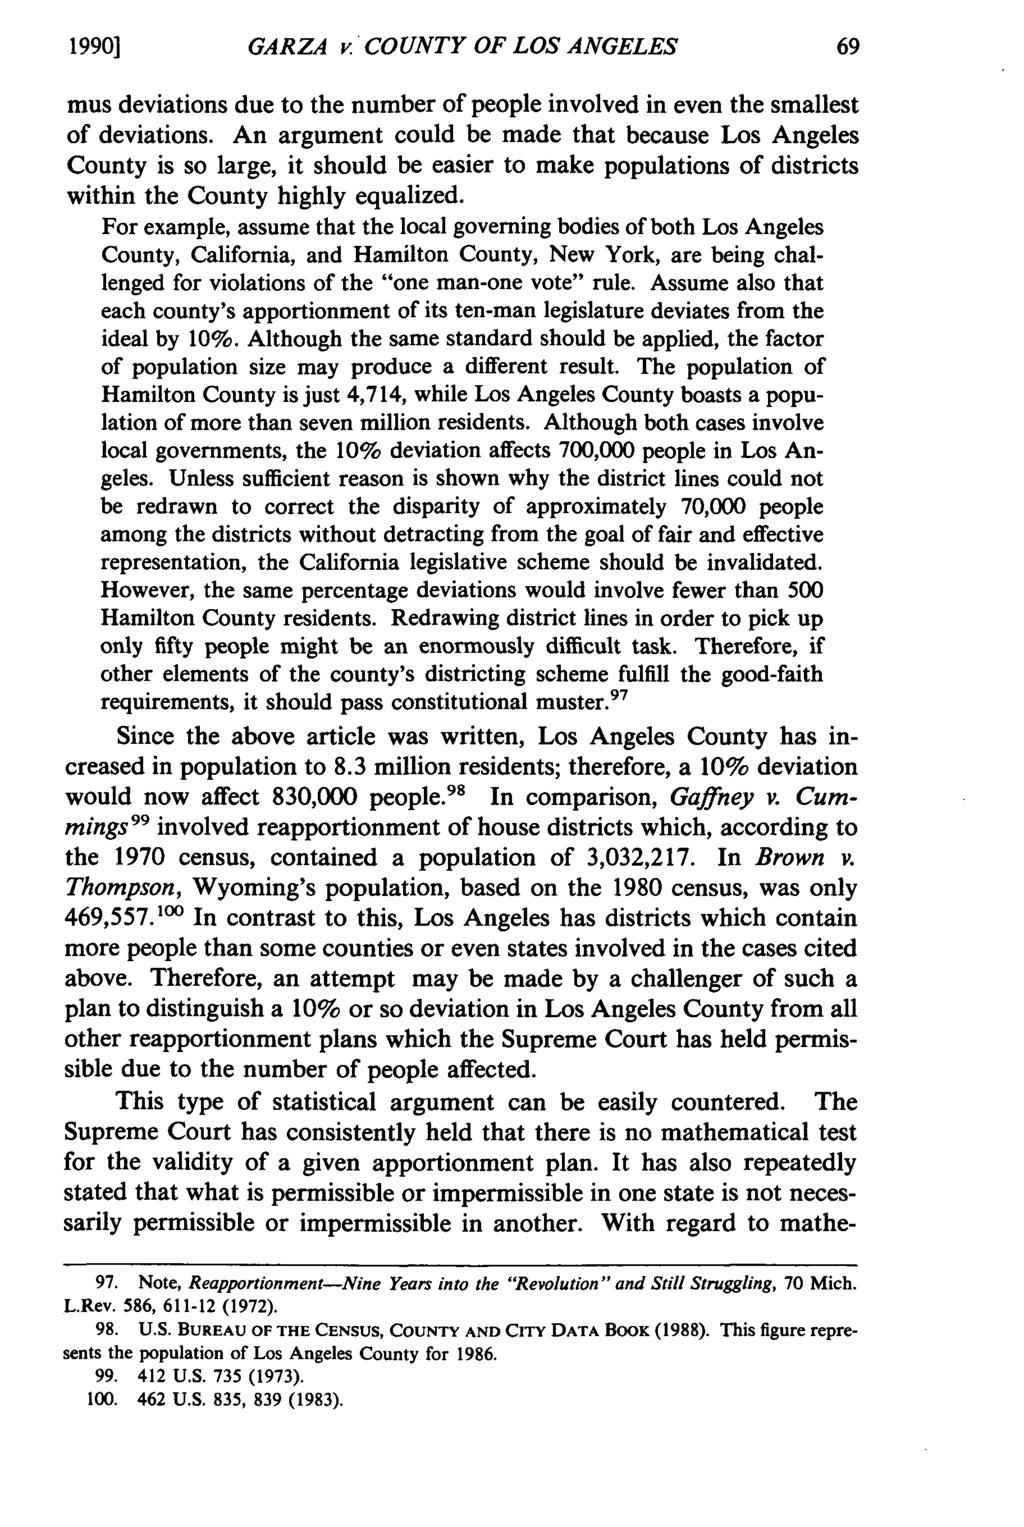 19901 GARZA v COUNTY OF LOS ANGELES mus deviations due to the number of people involved in even the smallest of deviations.